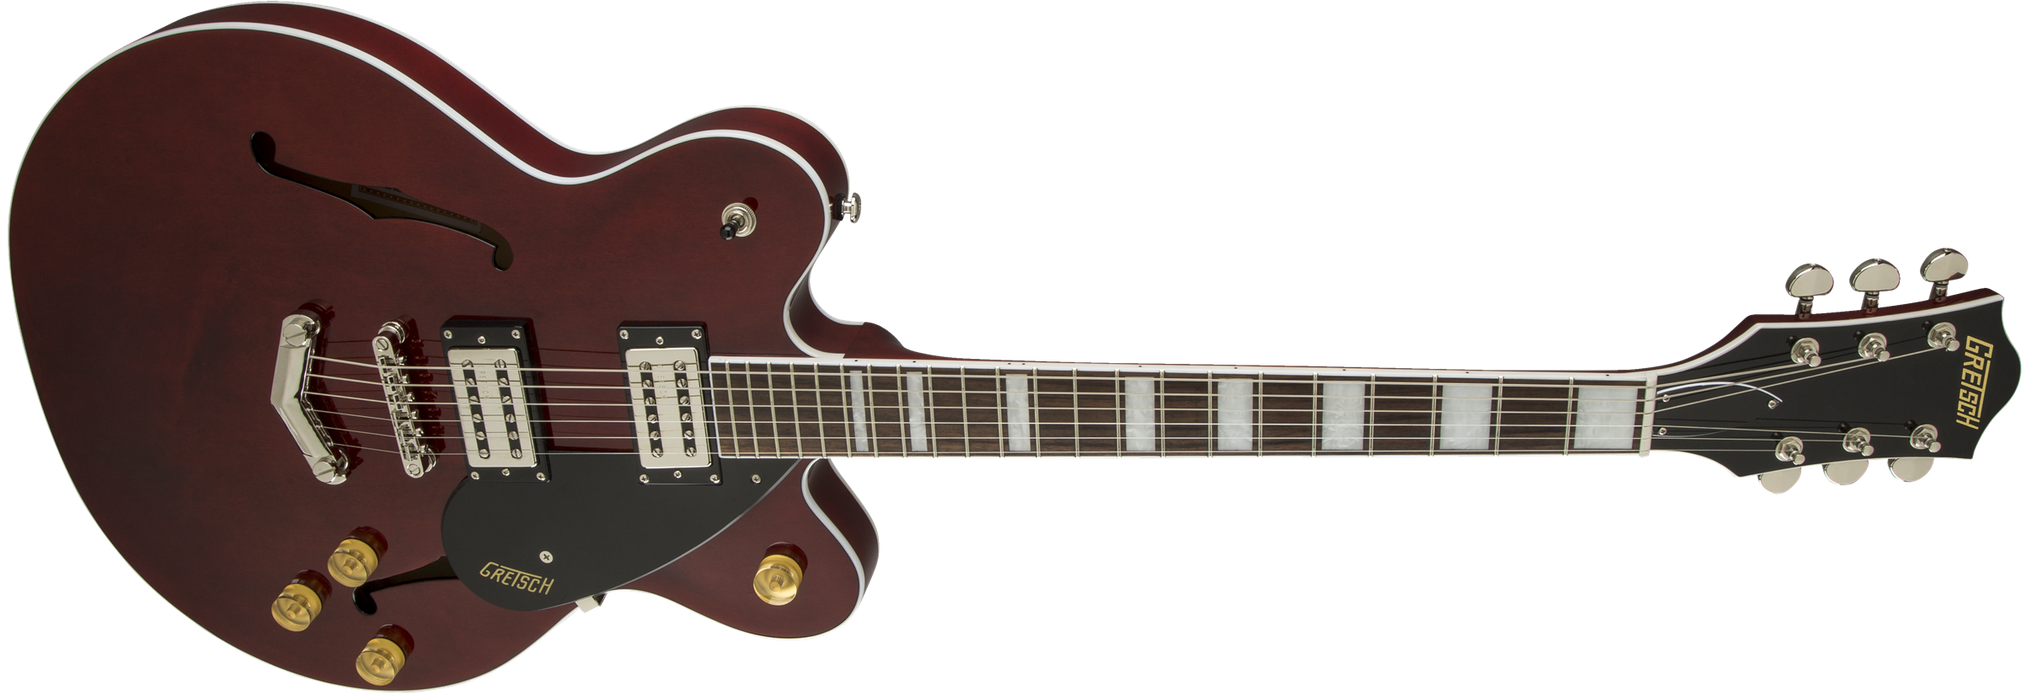 Gretsch G2622 Streamliner Center Block With V-Stop Tailpiece Broad'Tron Pickups Walnut Stain